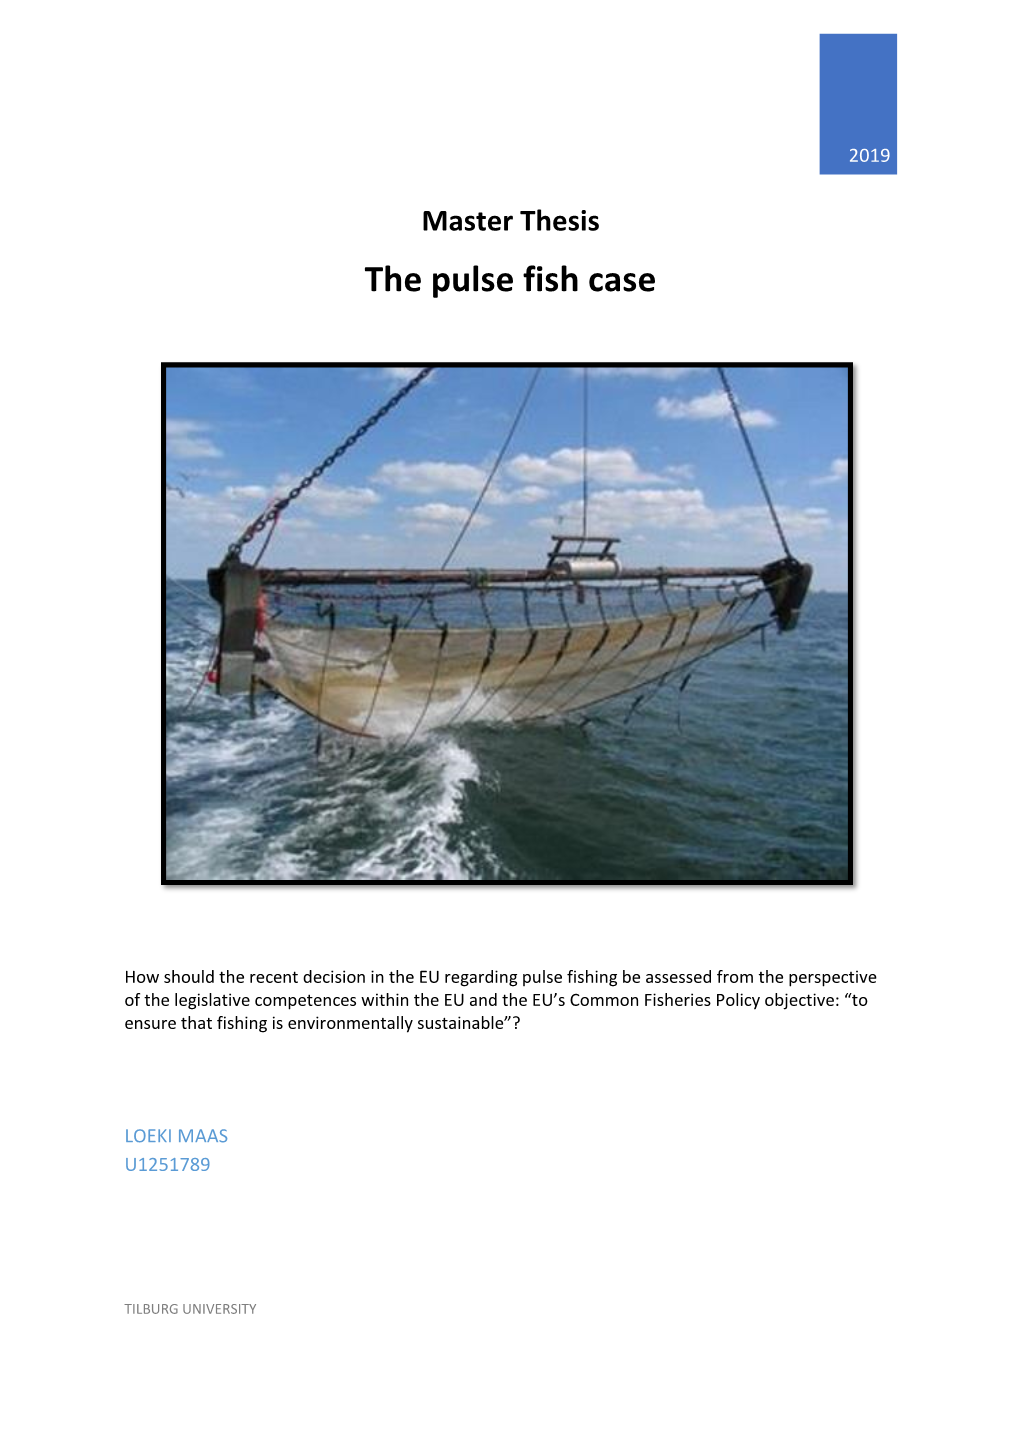 Master Thesis the Pulse Fish Case